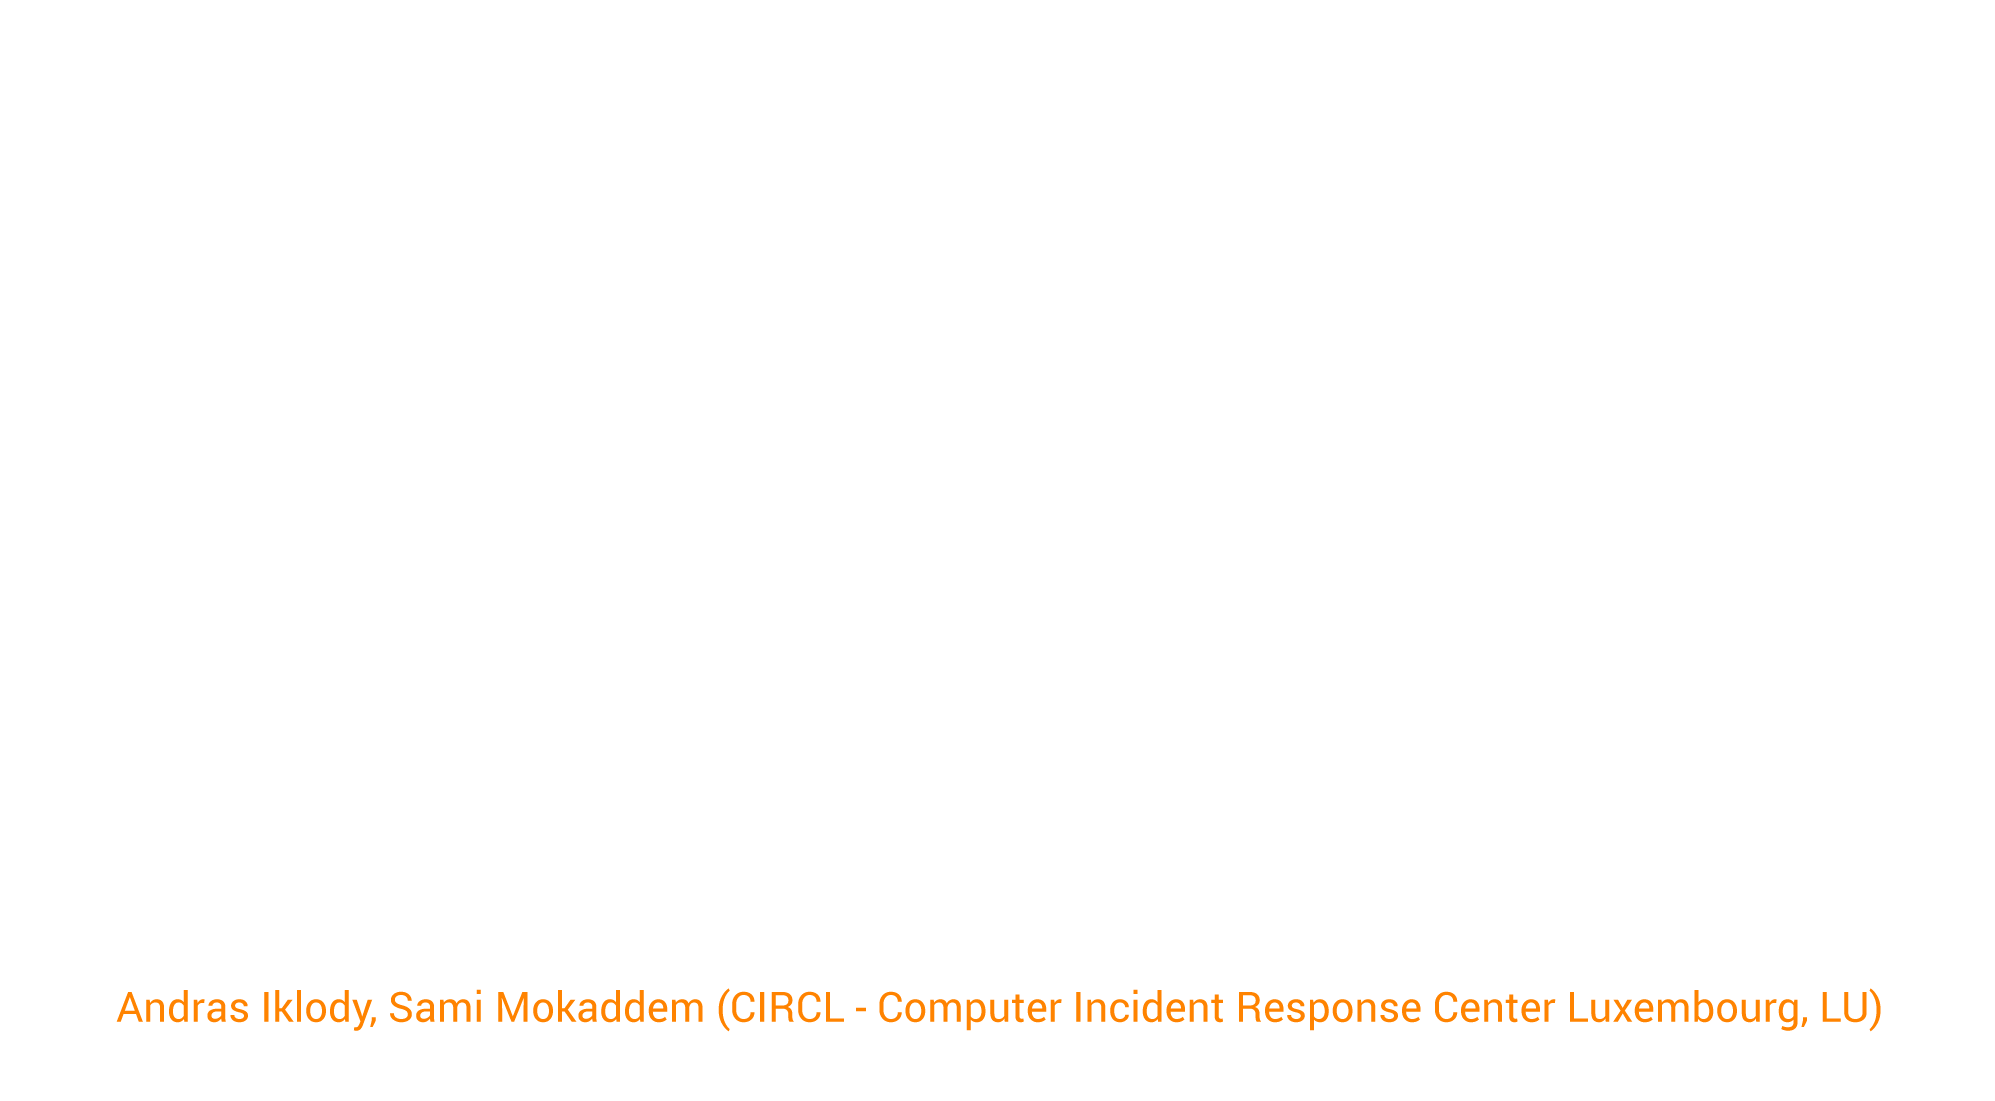 Community Management and Tool Orchestration the Open-Source Way via Cerebrate